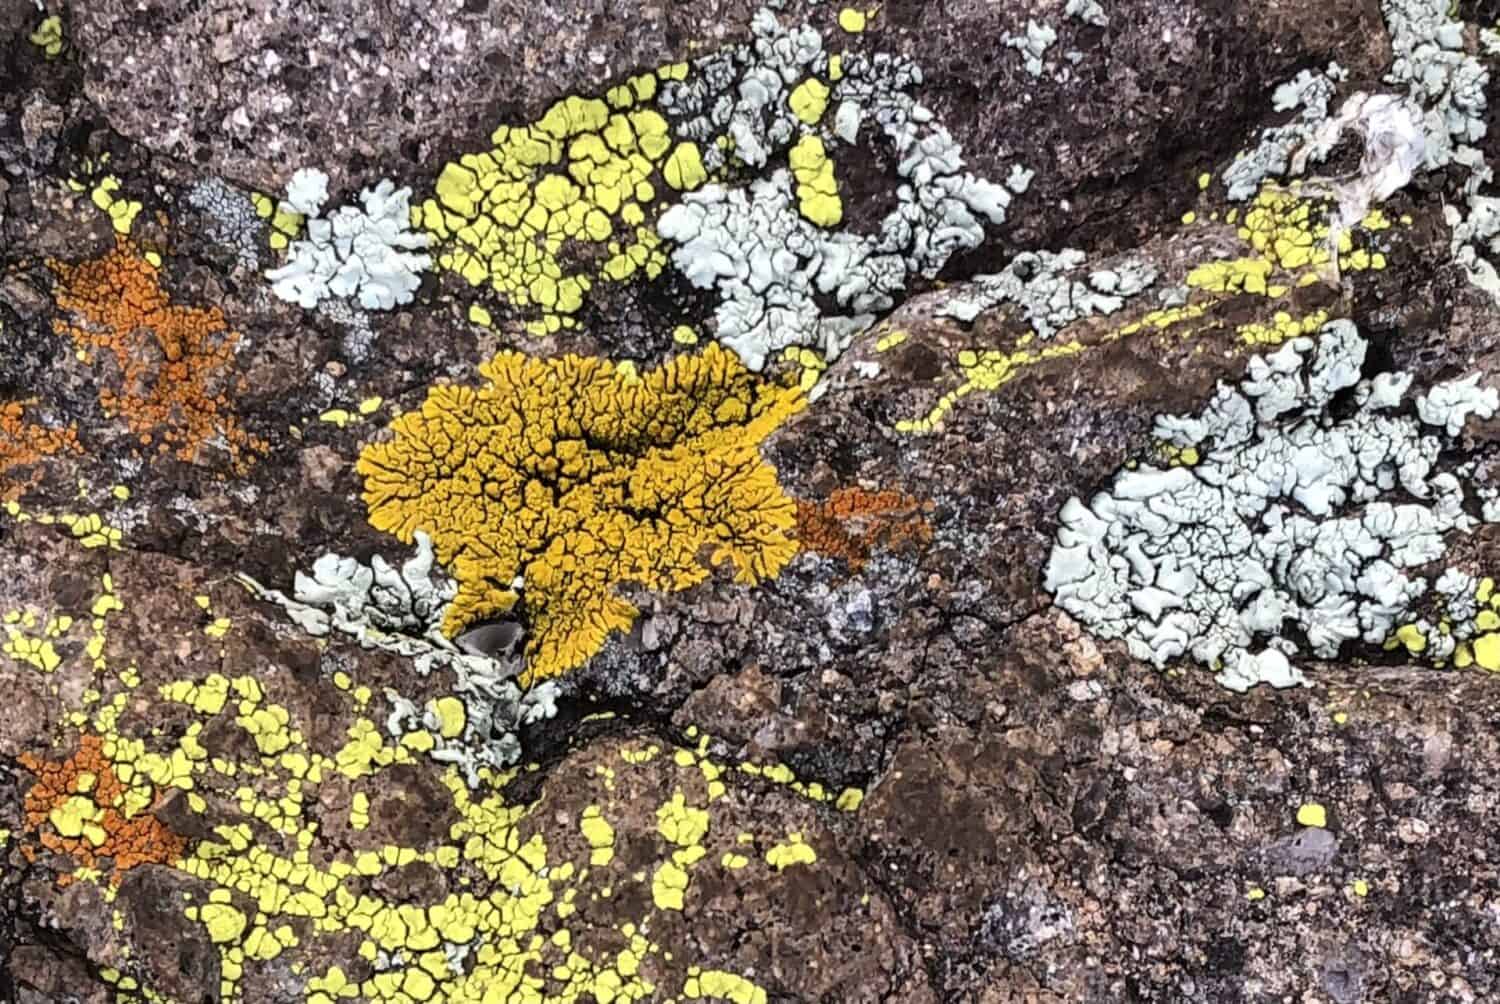 Different color lichens cover a pinkish rock: chartreuse, orange, pale green, brown.